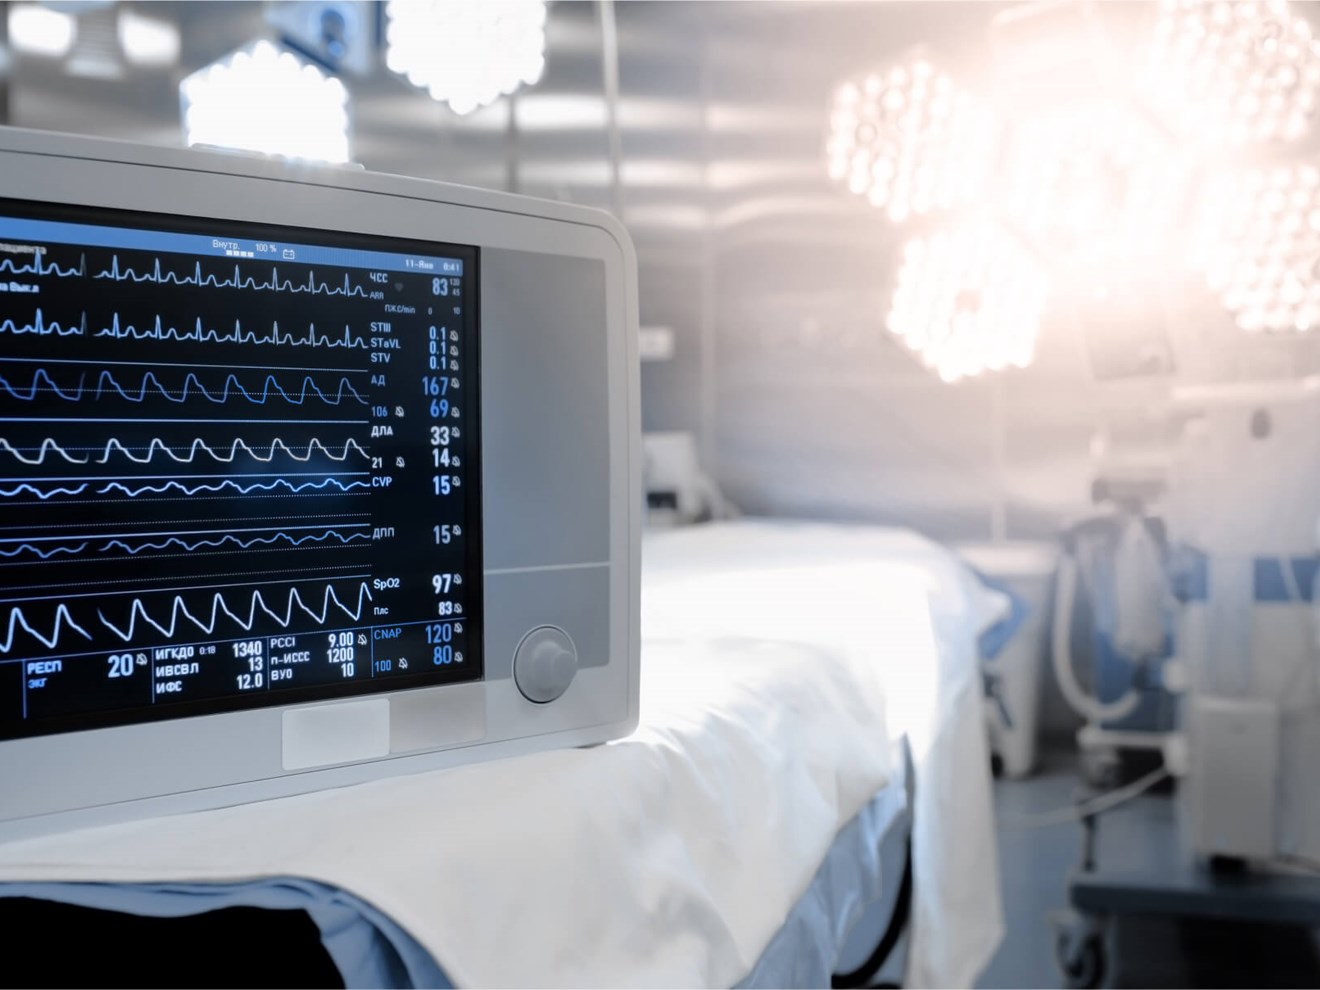 Cardiac Services works with Philips to solve telemetry issue for university hospital